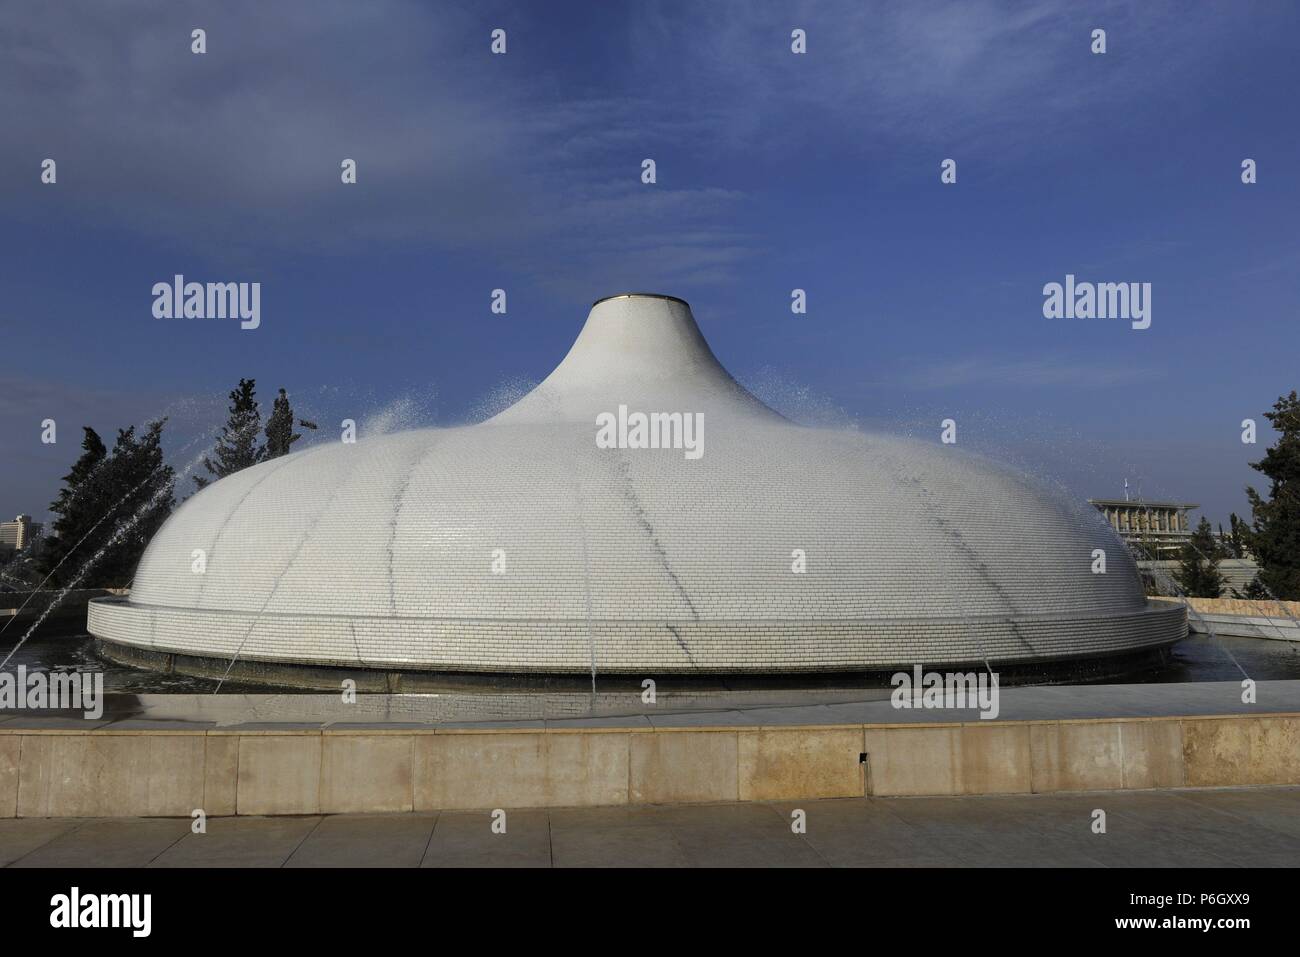 Israel. Jerusalem. Shire of the Book, designed by Armand Phillip Bartos and Frederick John Kiesler, 1965. White dome. It houses the Dead See Scrolls. Exterior. Stock Photo